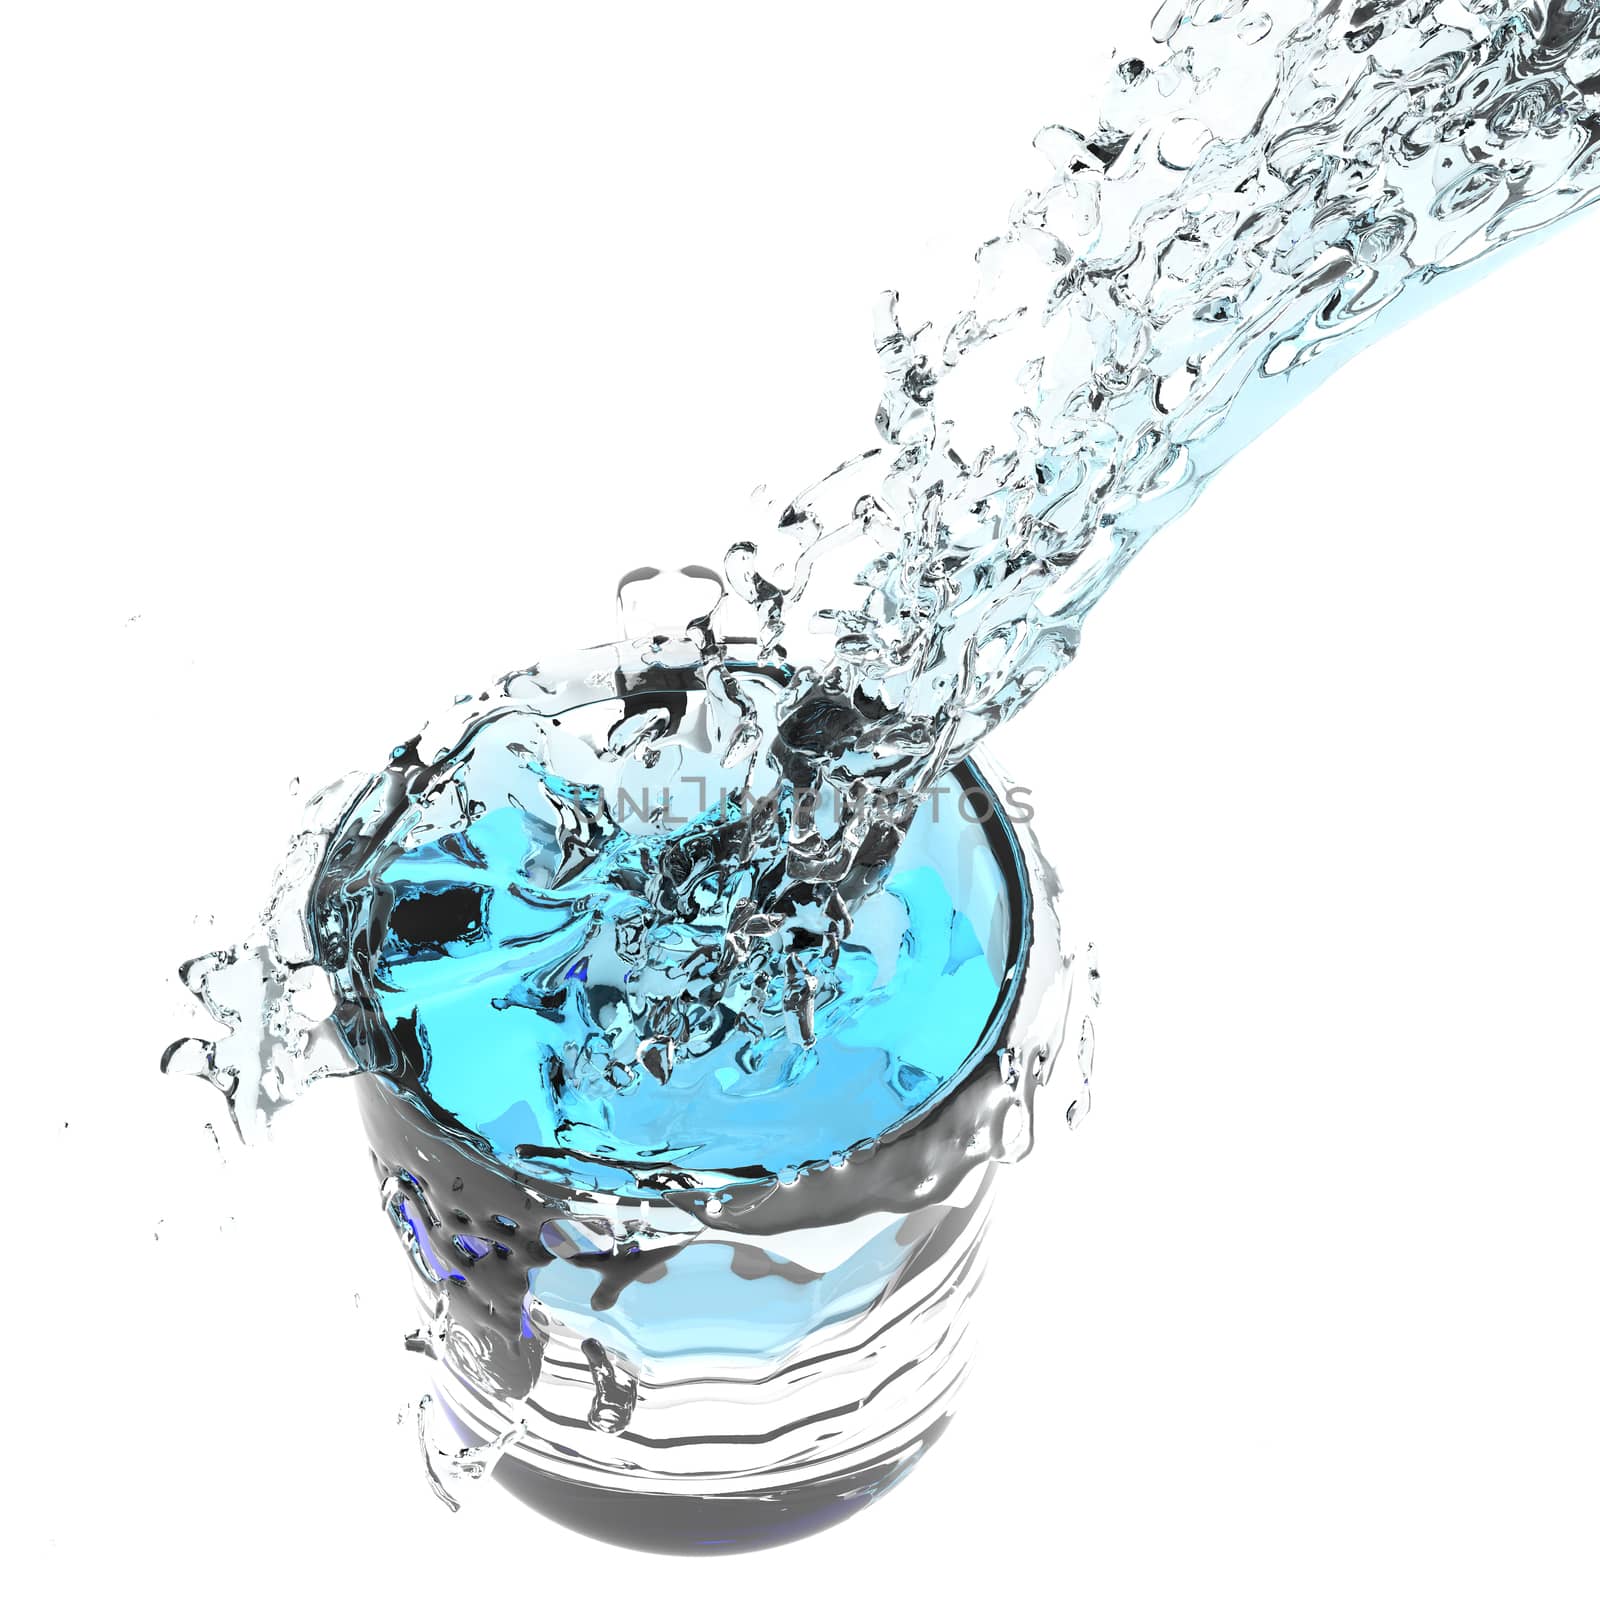 3d water splash  by everythingpossible